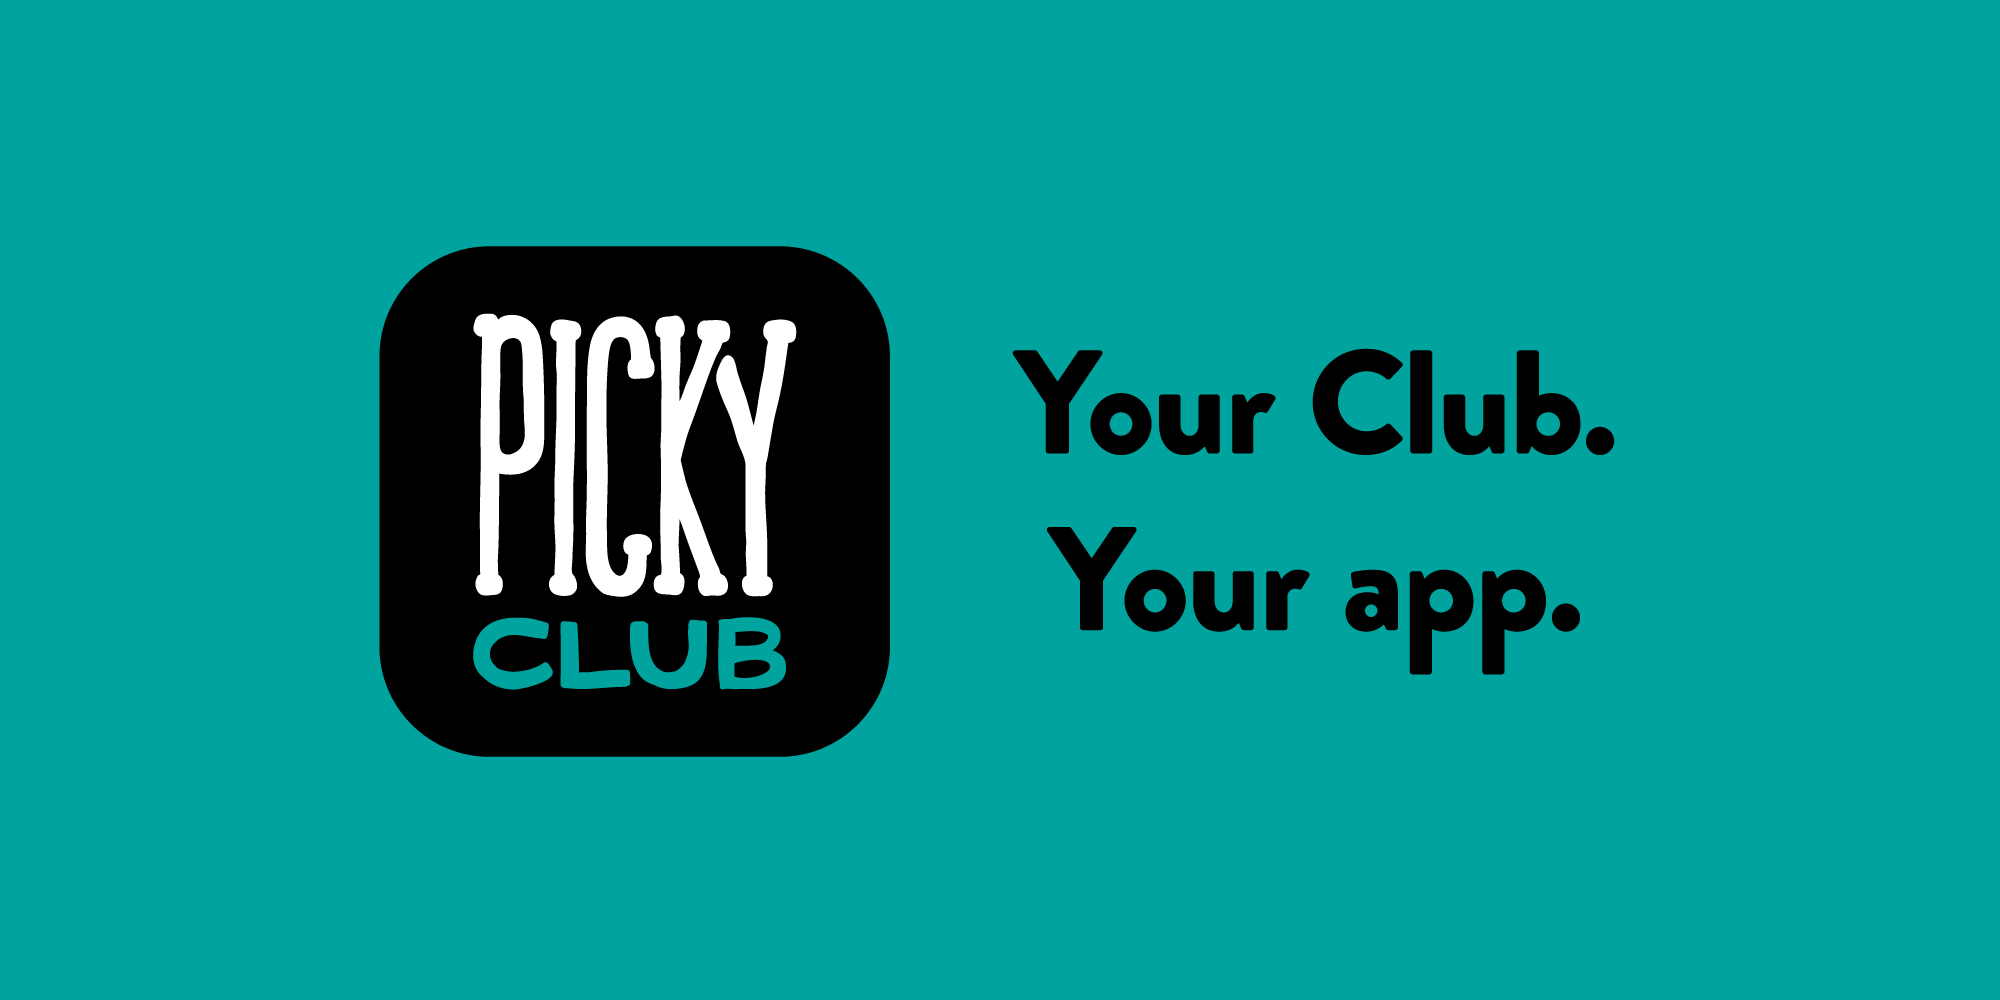 Welcome to the Picky Club App!